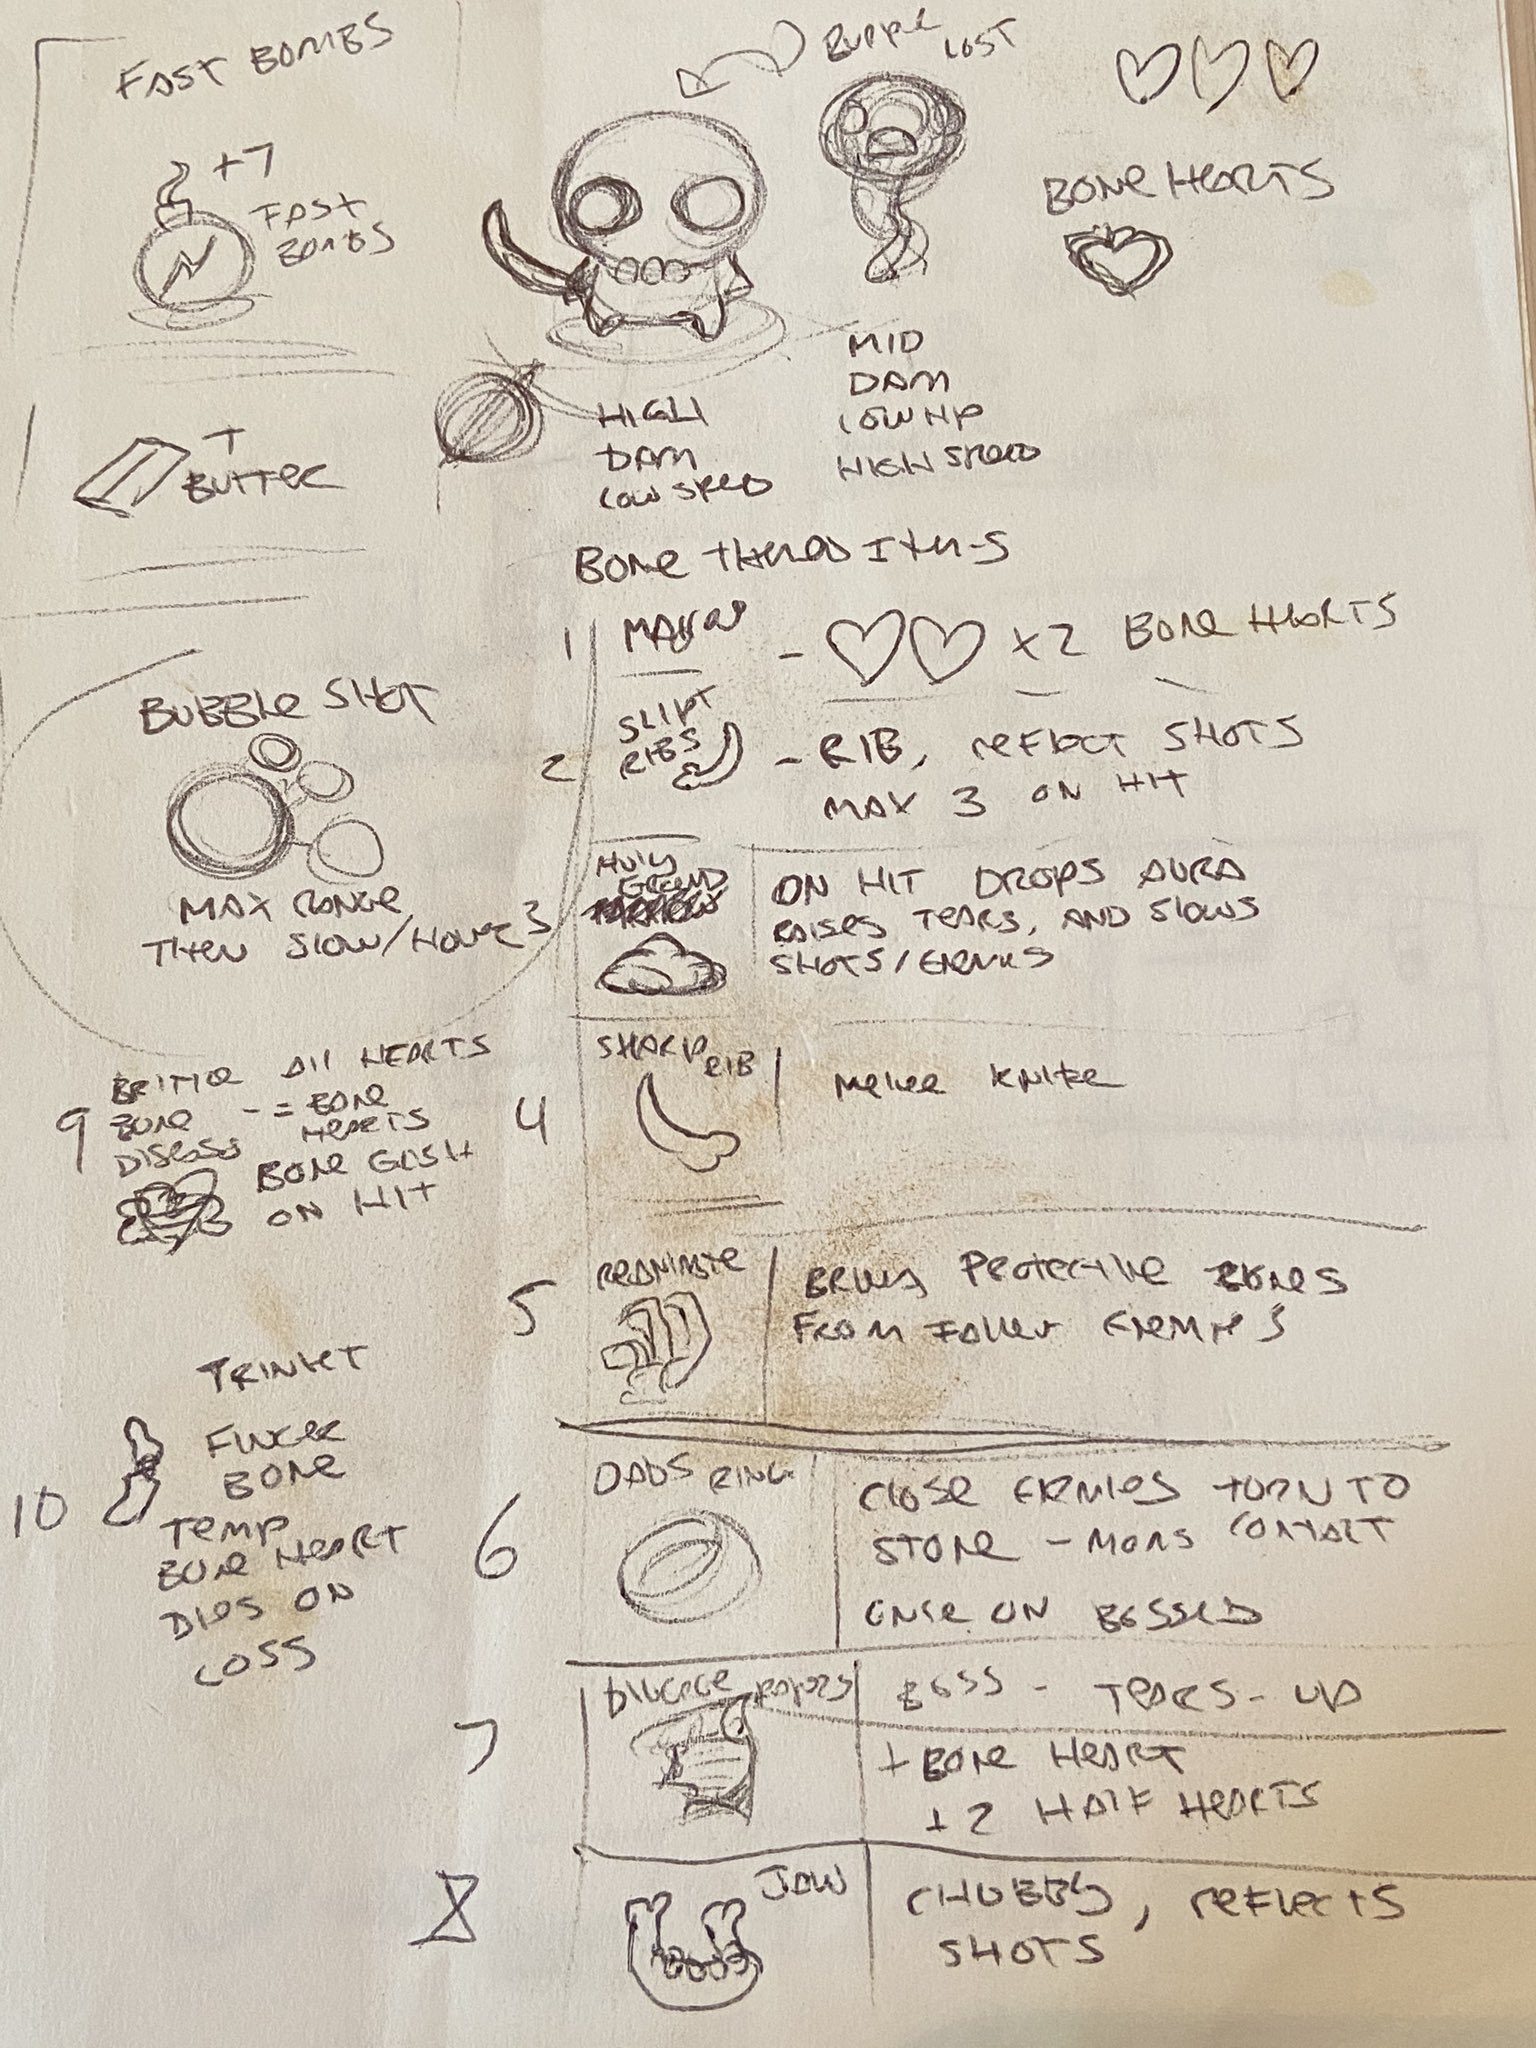 how to spawn items in binding of isaac